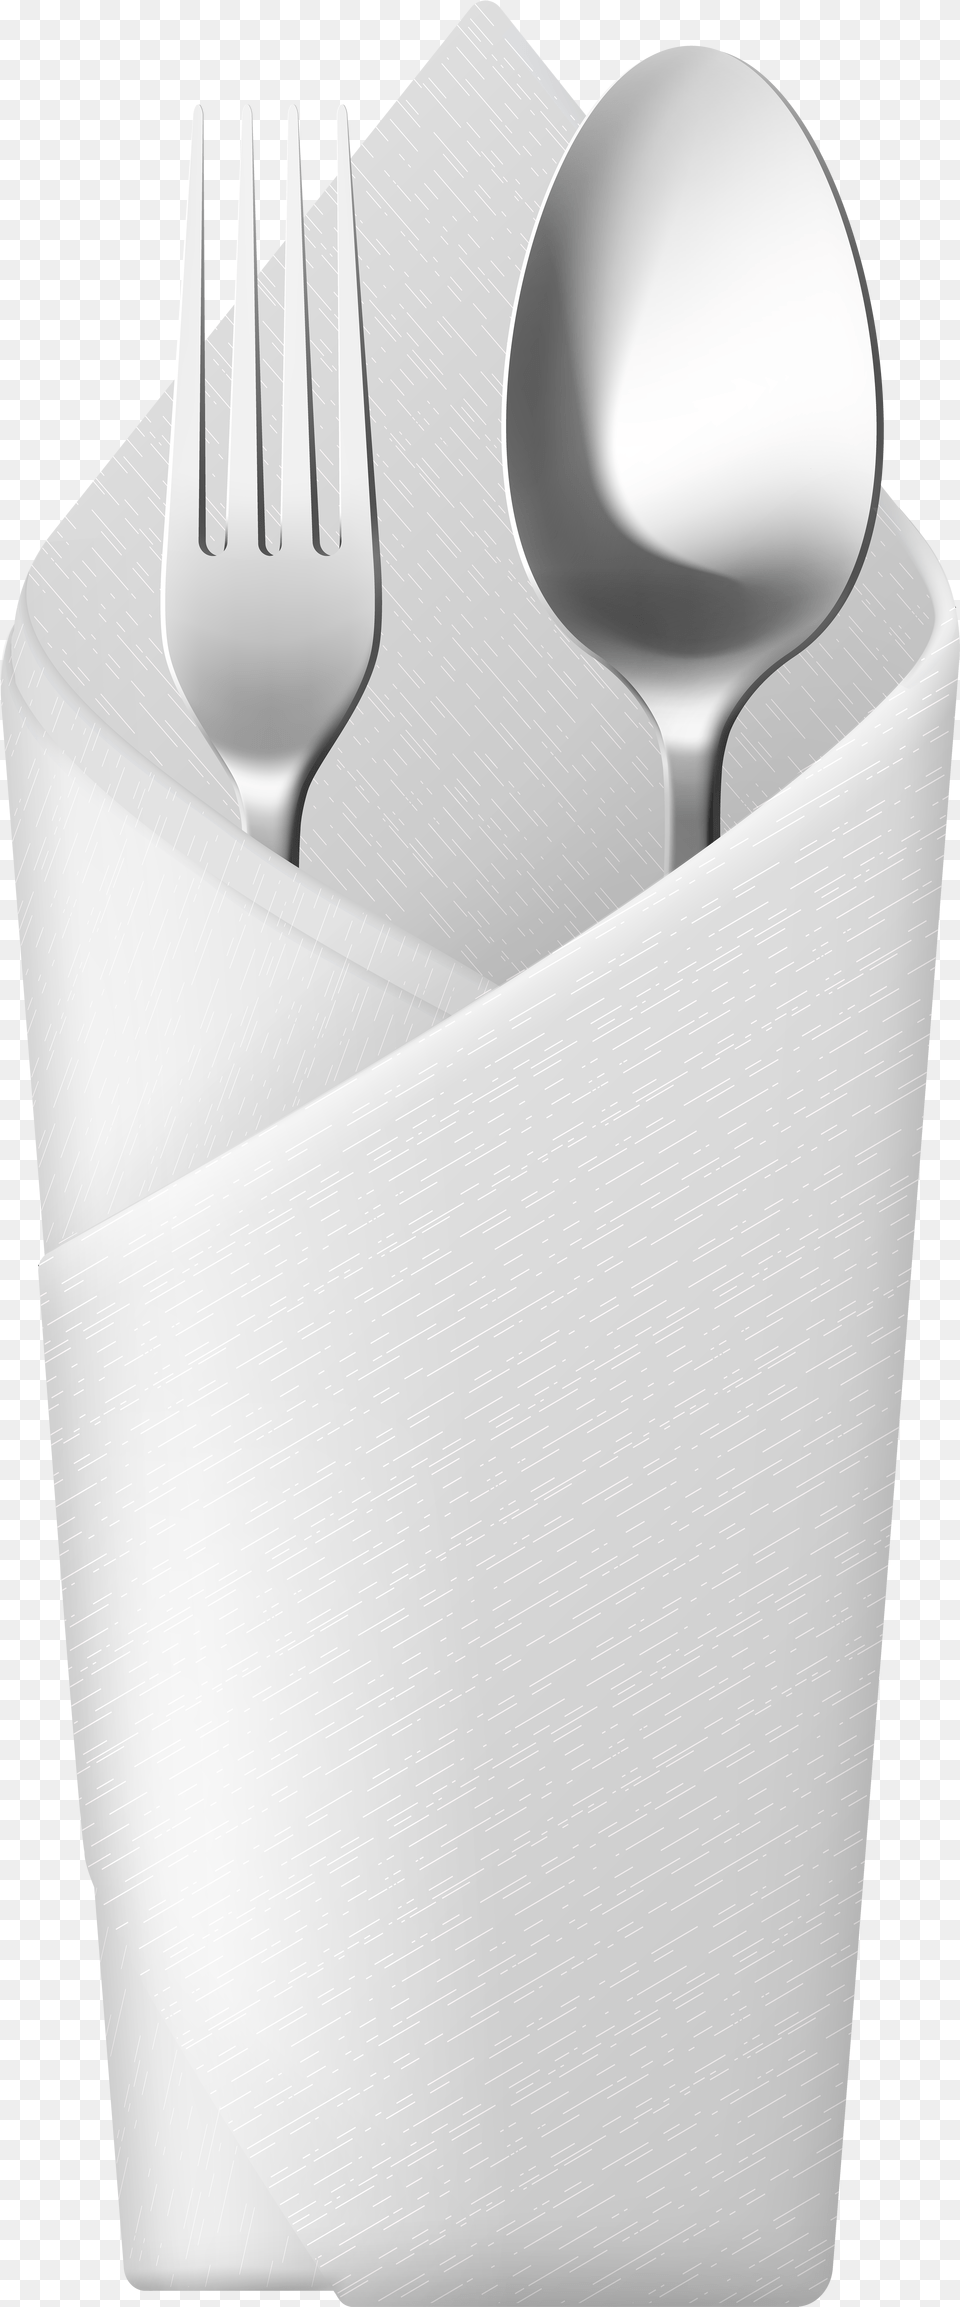 Spoon And Fork In Napkin Clip Art Gadget, Cutlery Png Image